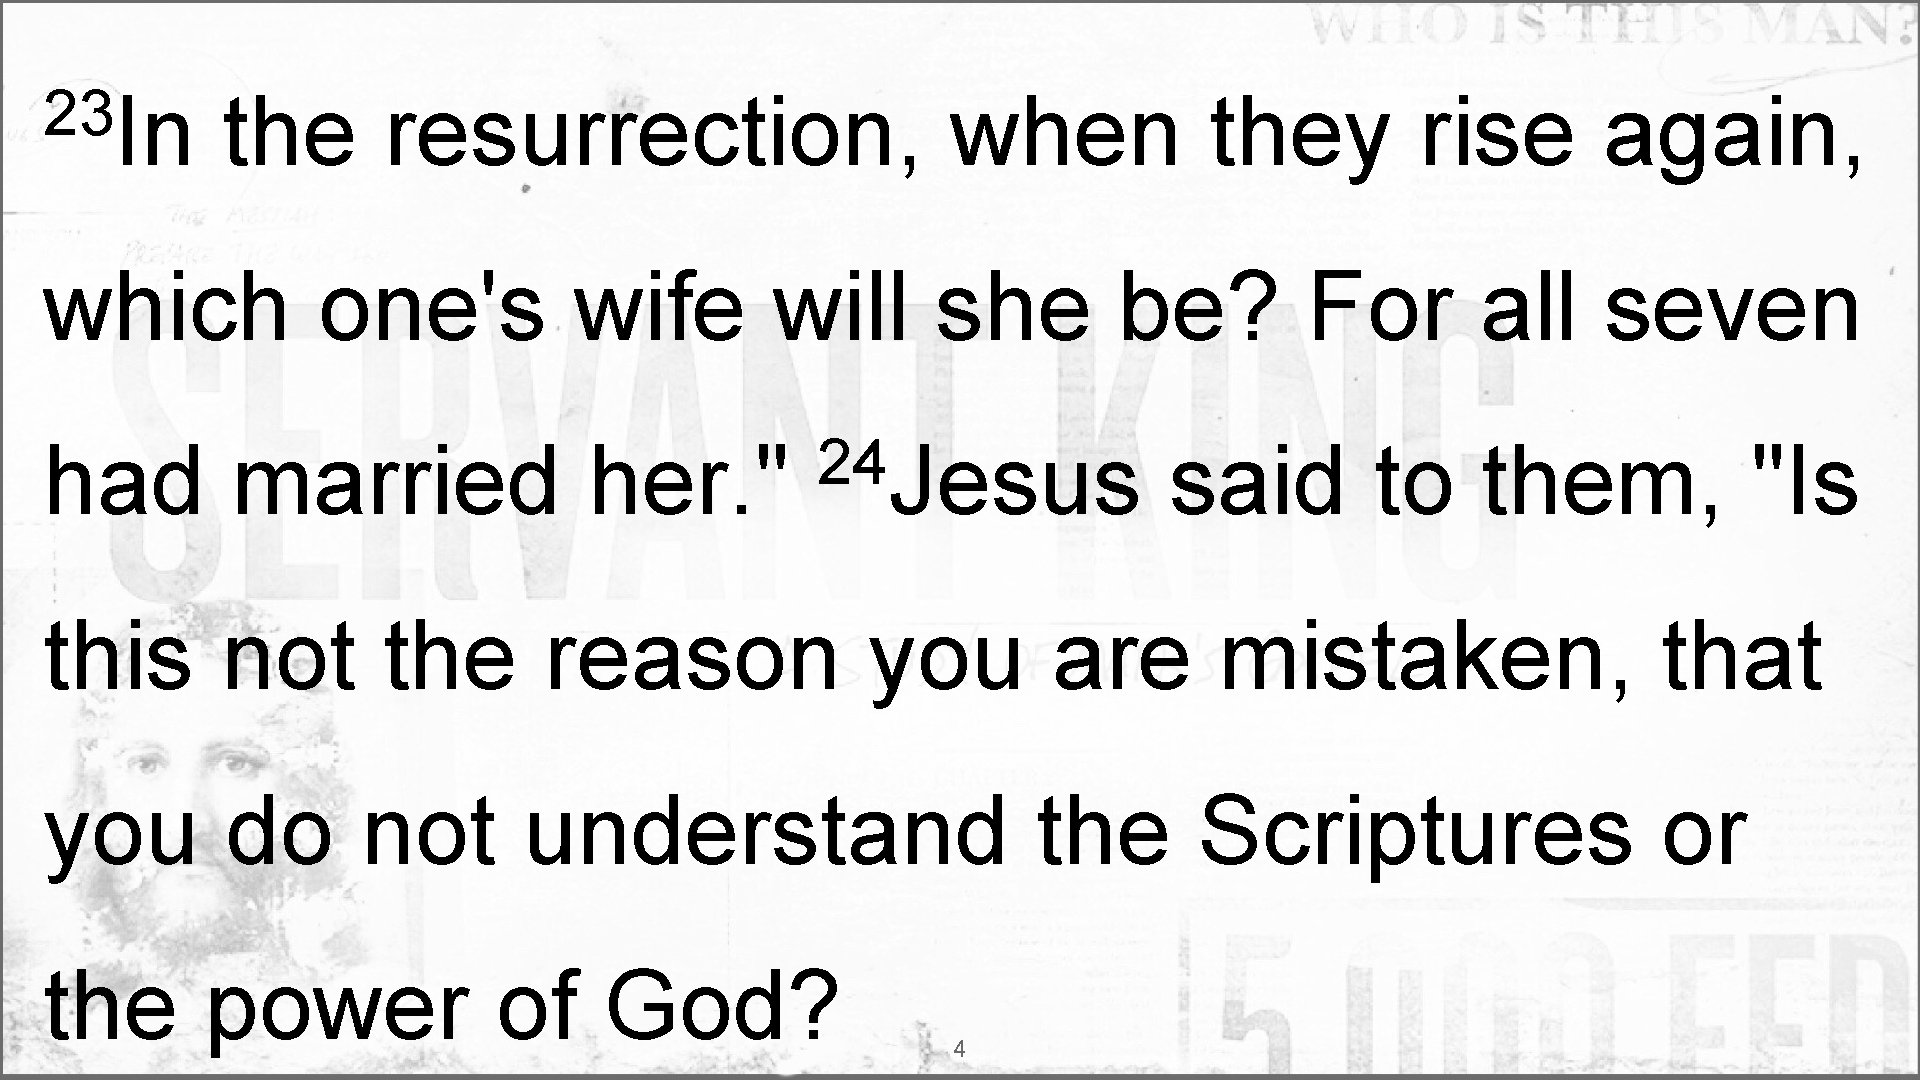 23 In the resurrection, when they rise again, which one's wife will she be?